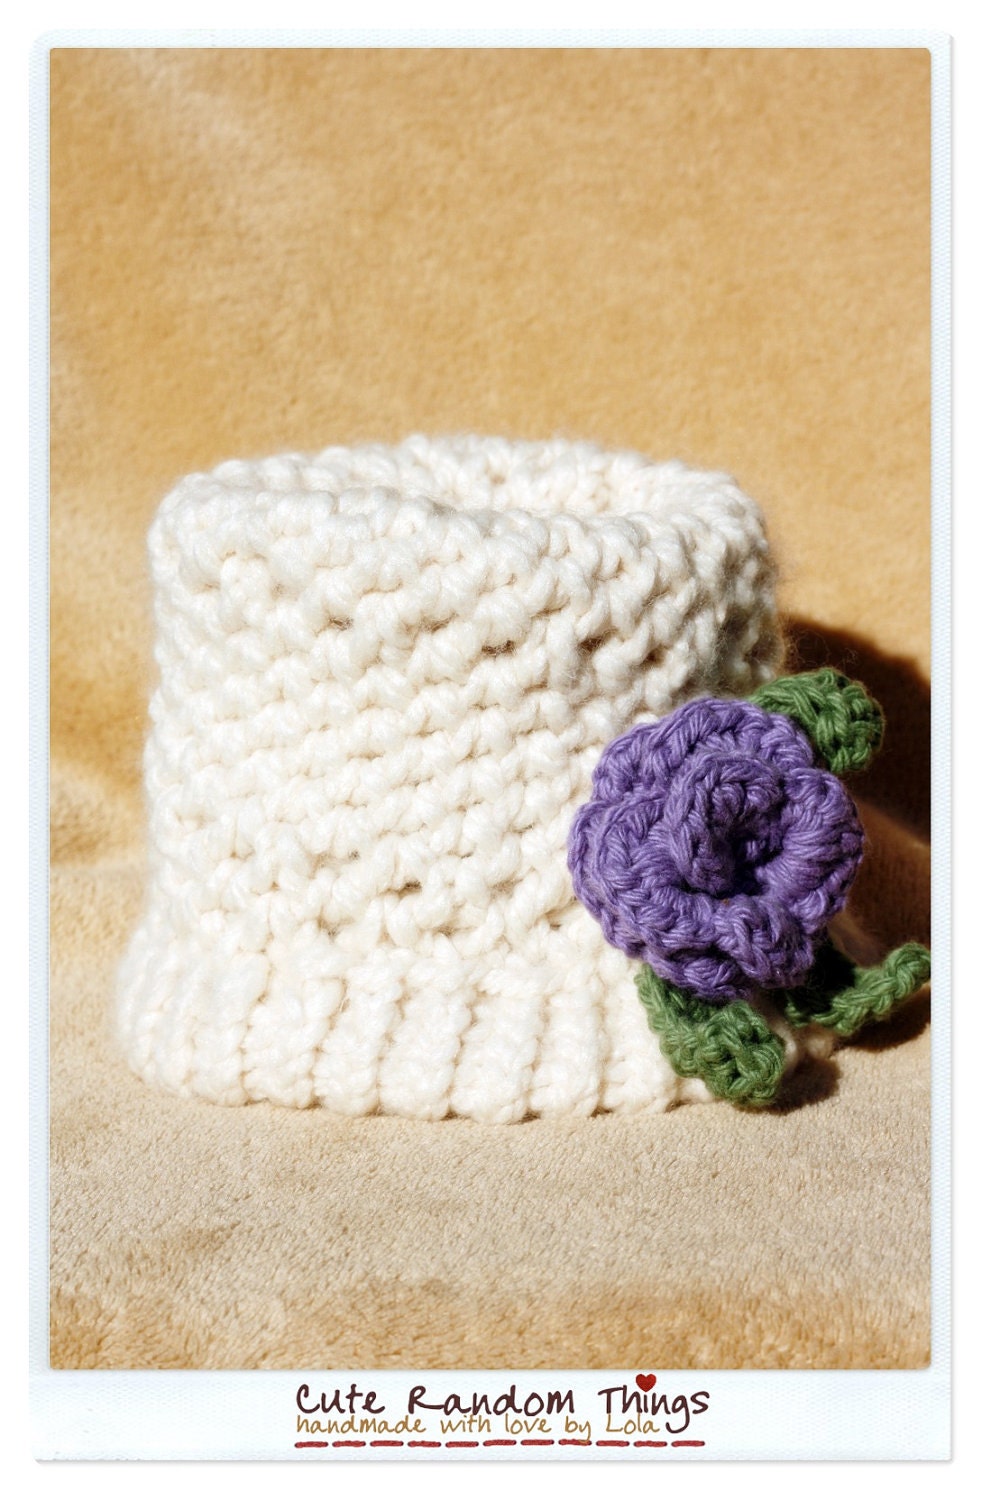 Elegant lady with purple flower - Knitted baby hat